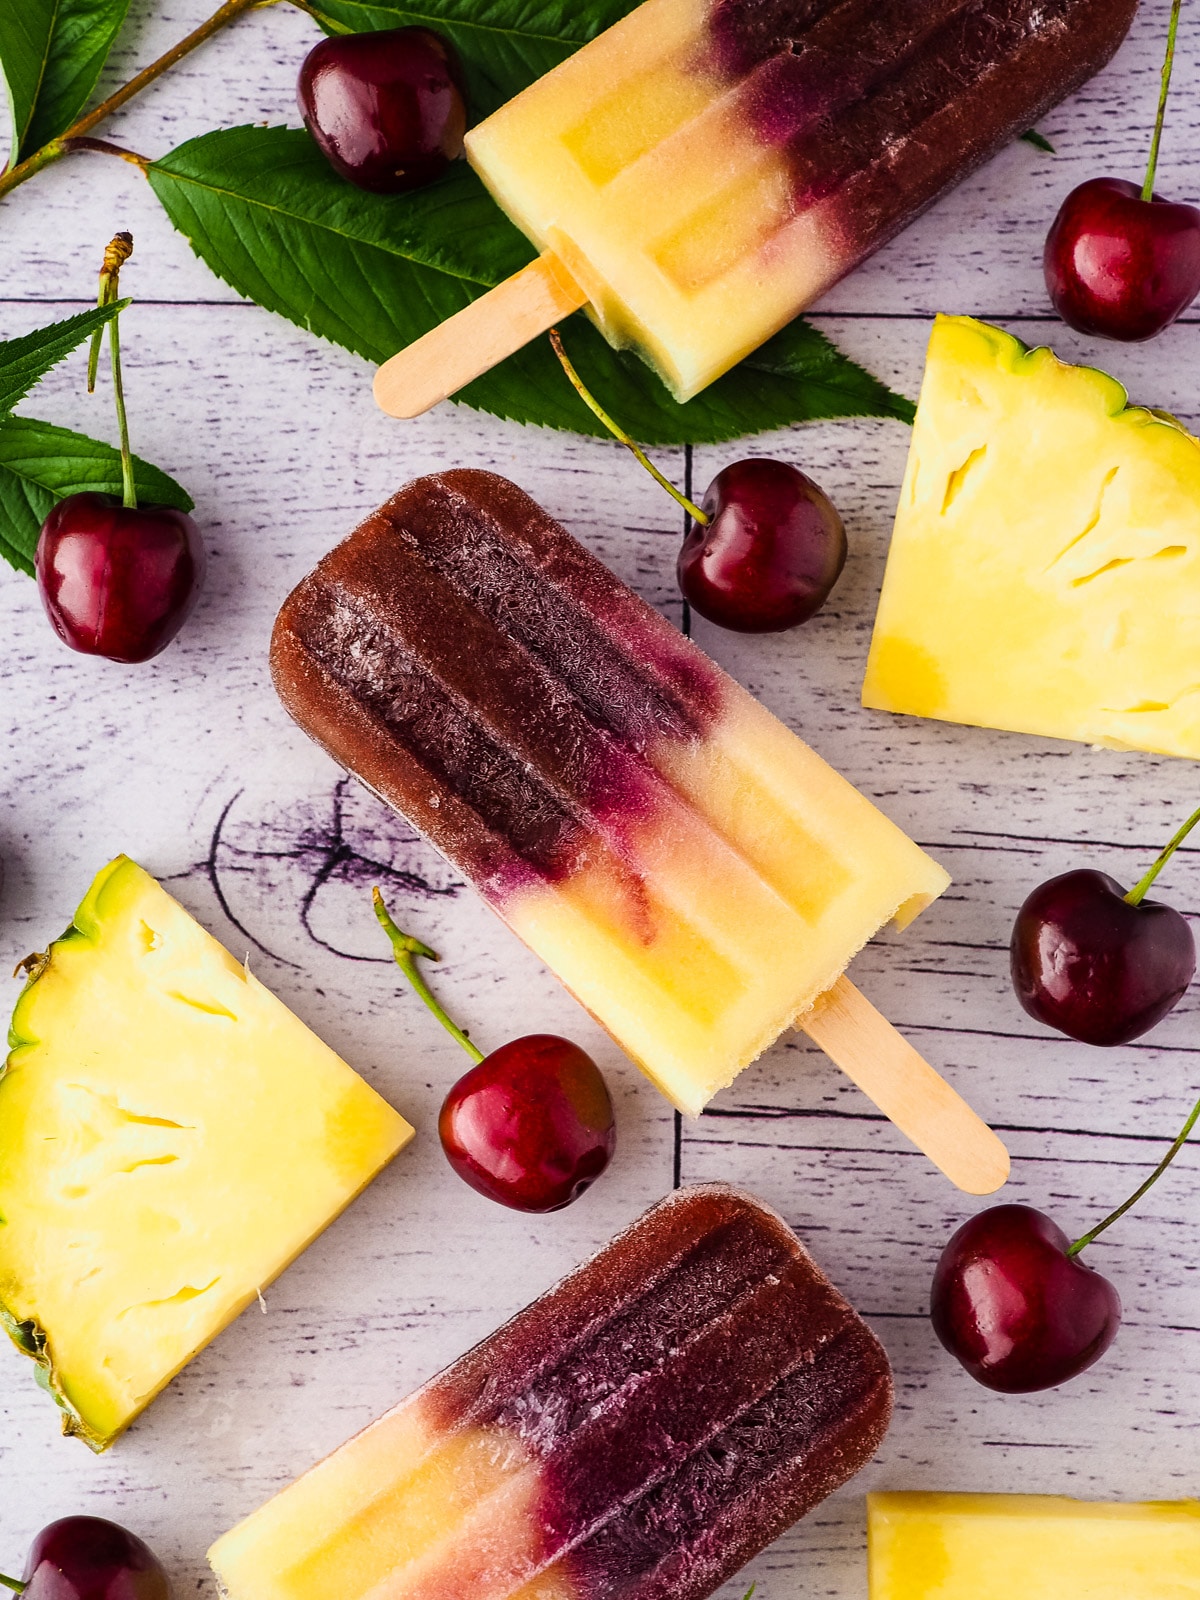 Popsicles surrounded by fresh pineapple, cherries and cherry leaves.